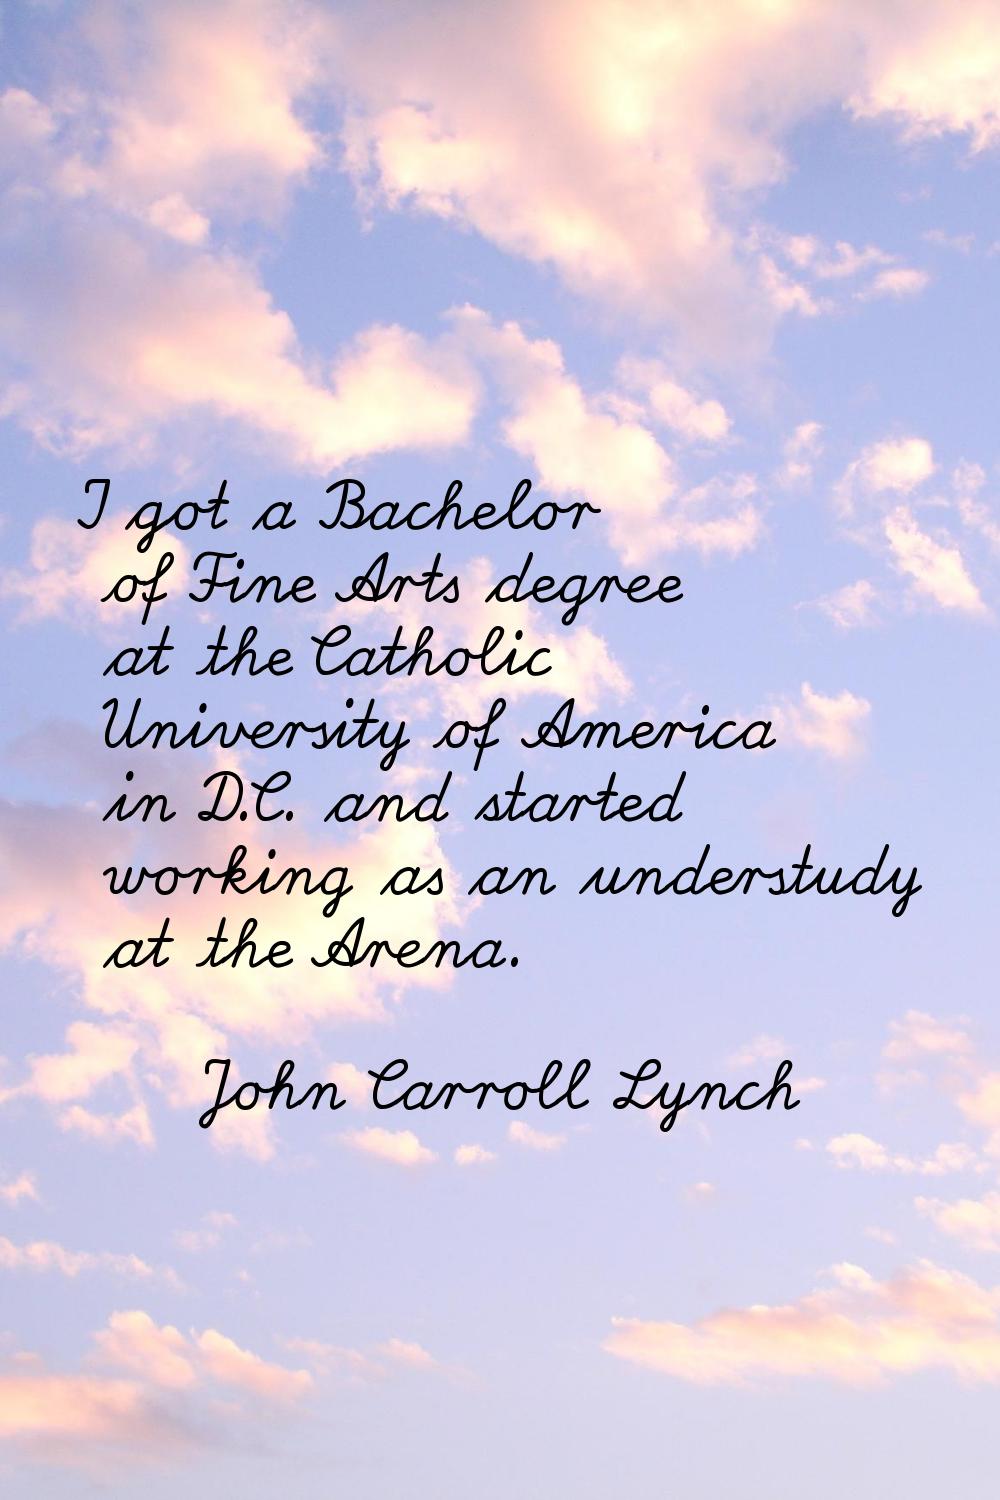 I got a Bachelor of Fine Arts degree at the Catholic University of America in D.C. and started work